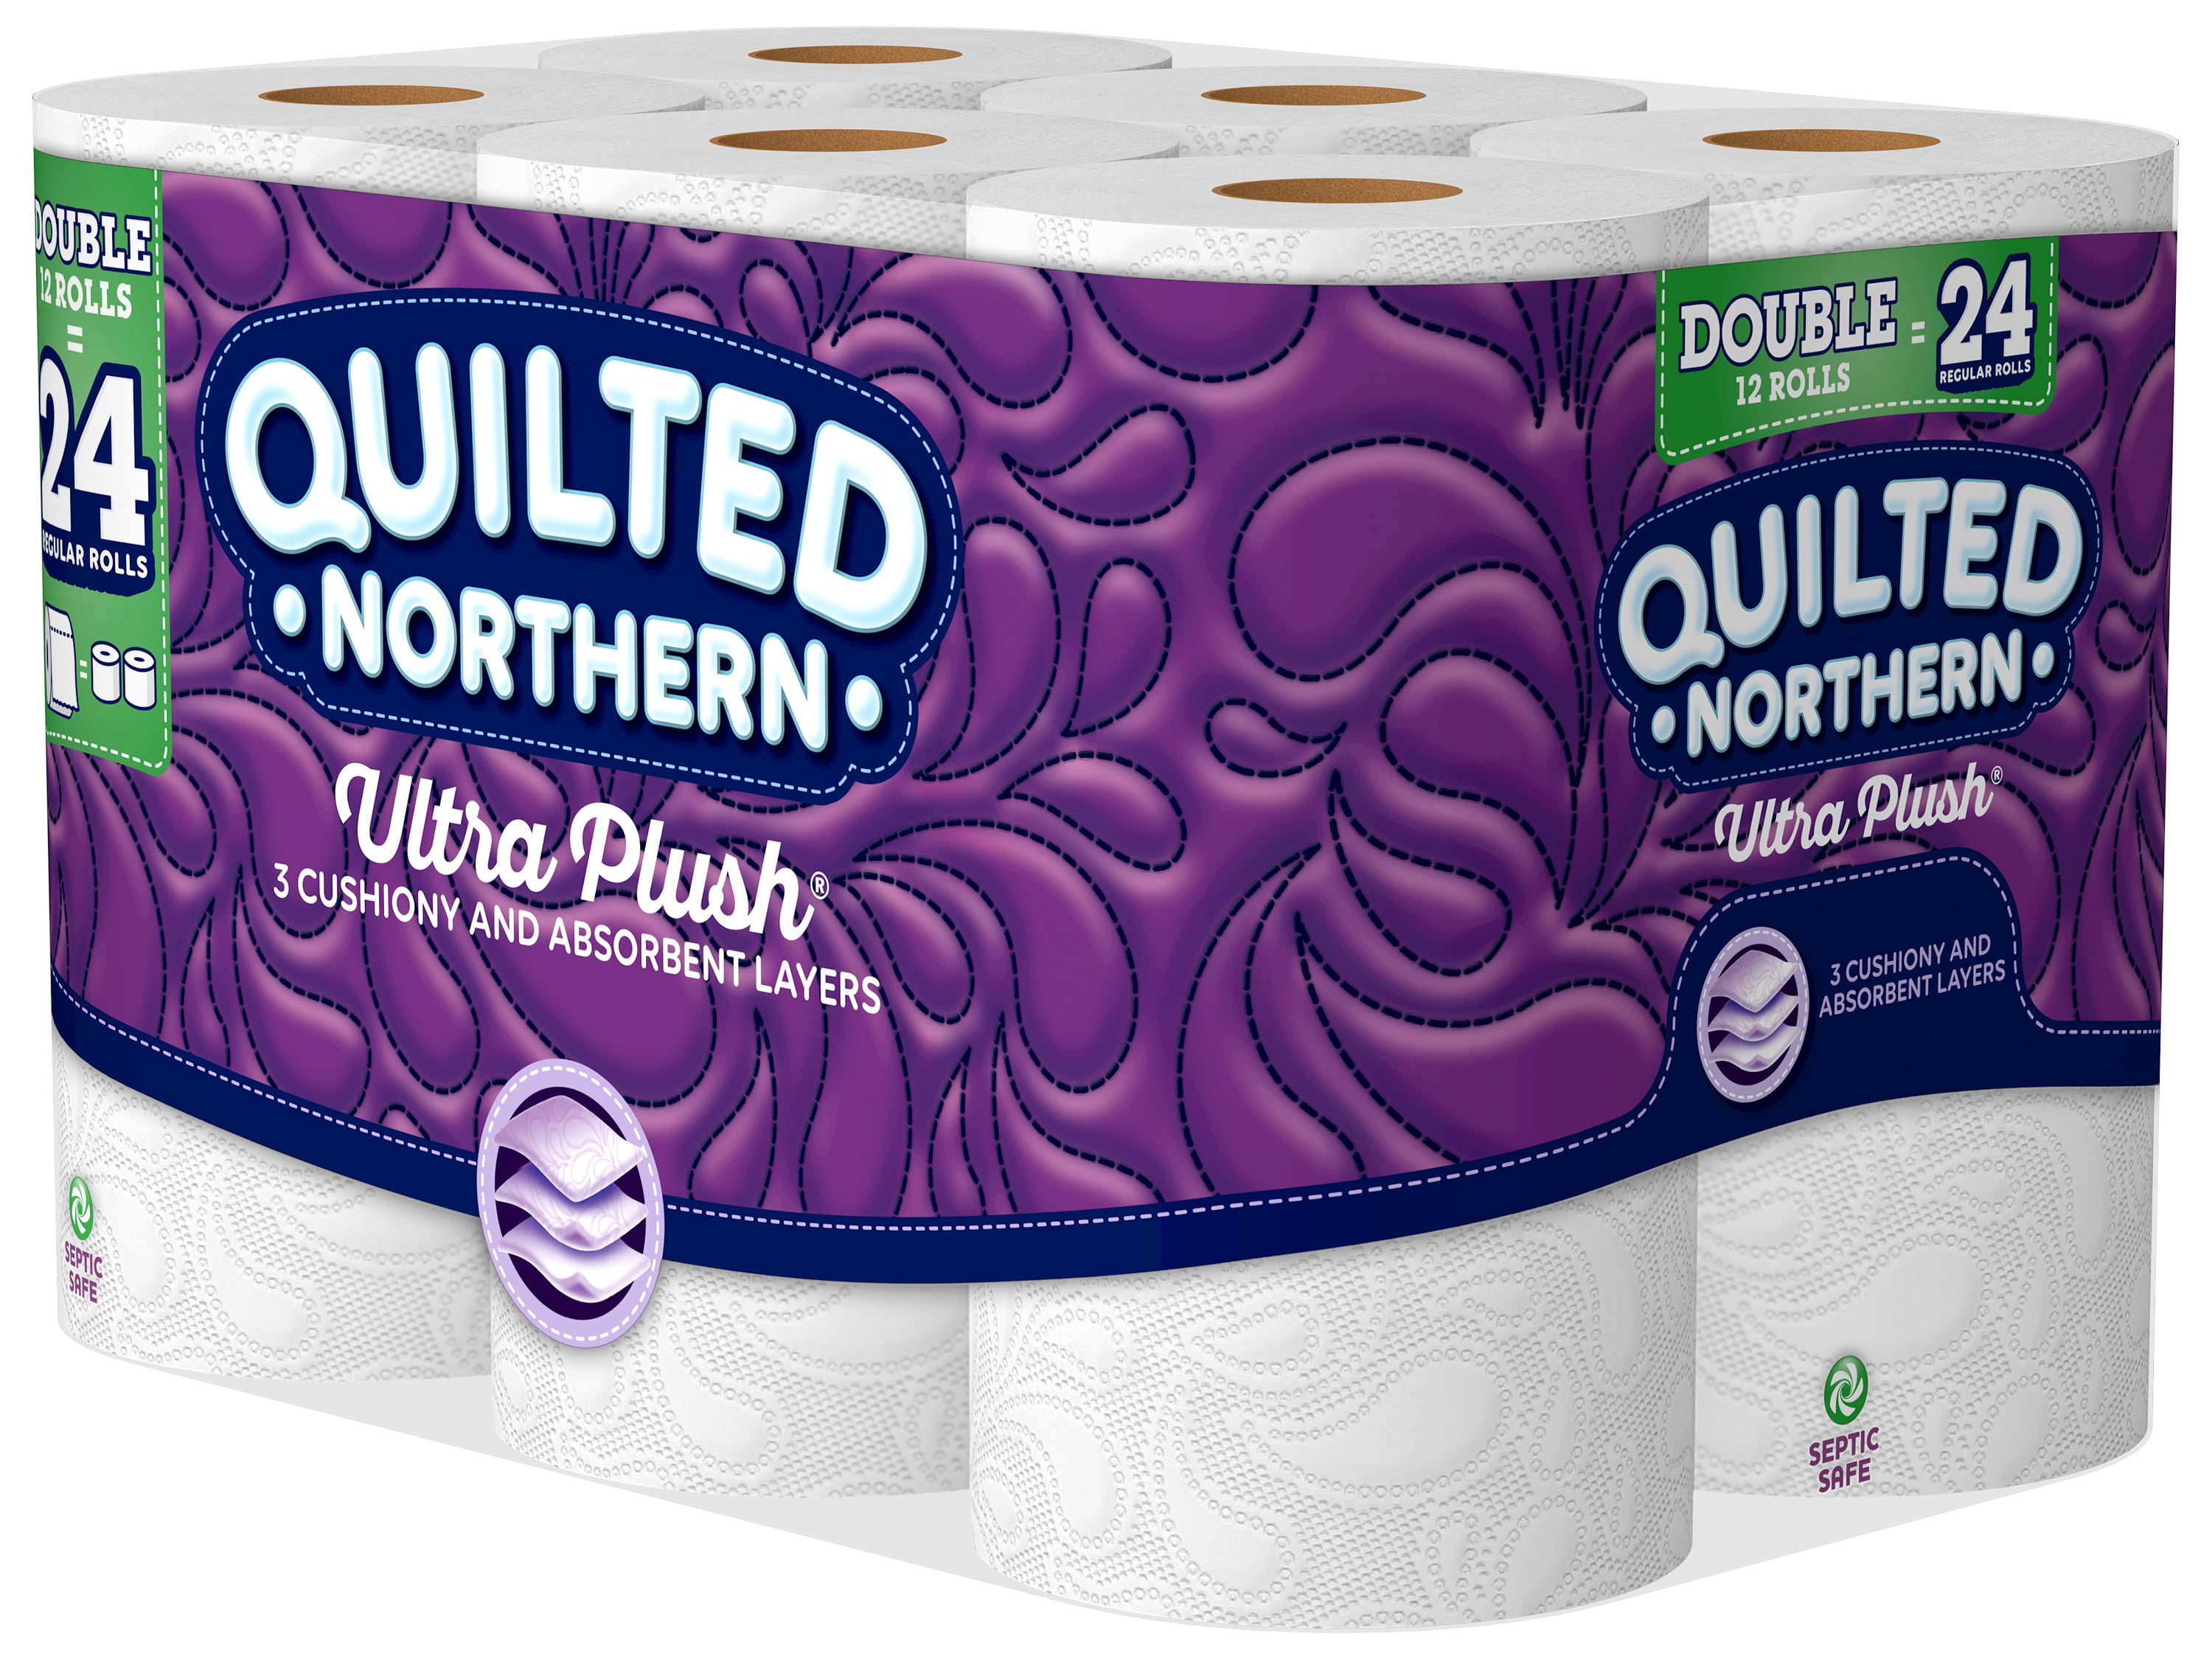 Quilted Northern Ultra Plush Bathroom Tissue, Unscented, Double Rolls,  3-Ply, Toilet Paper